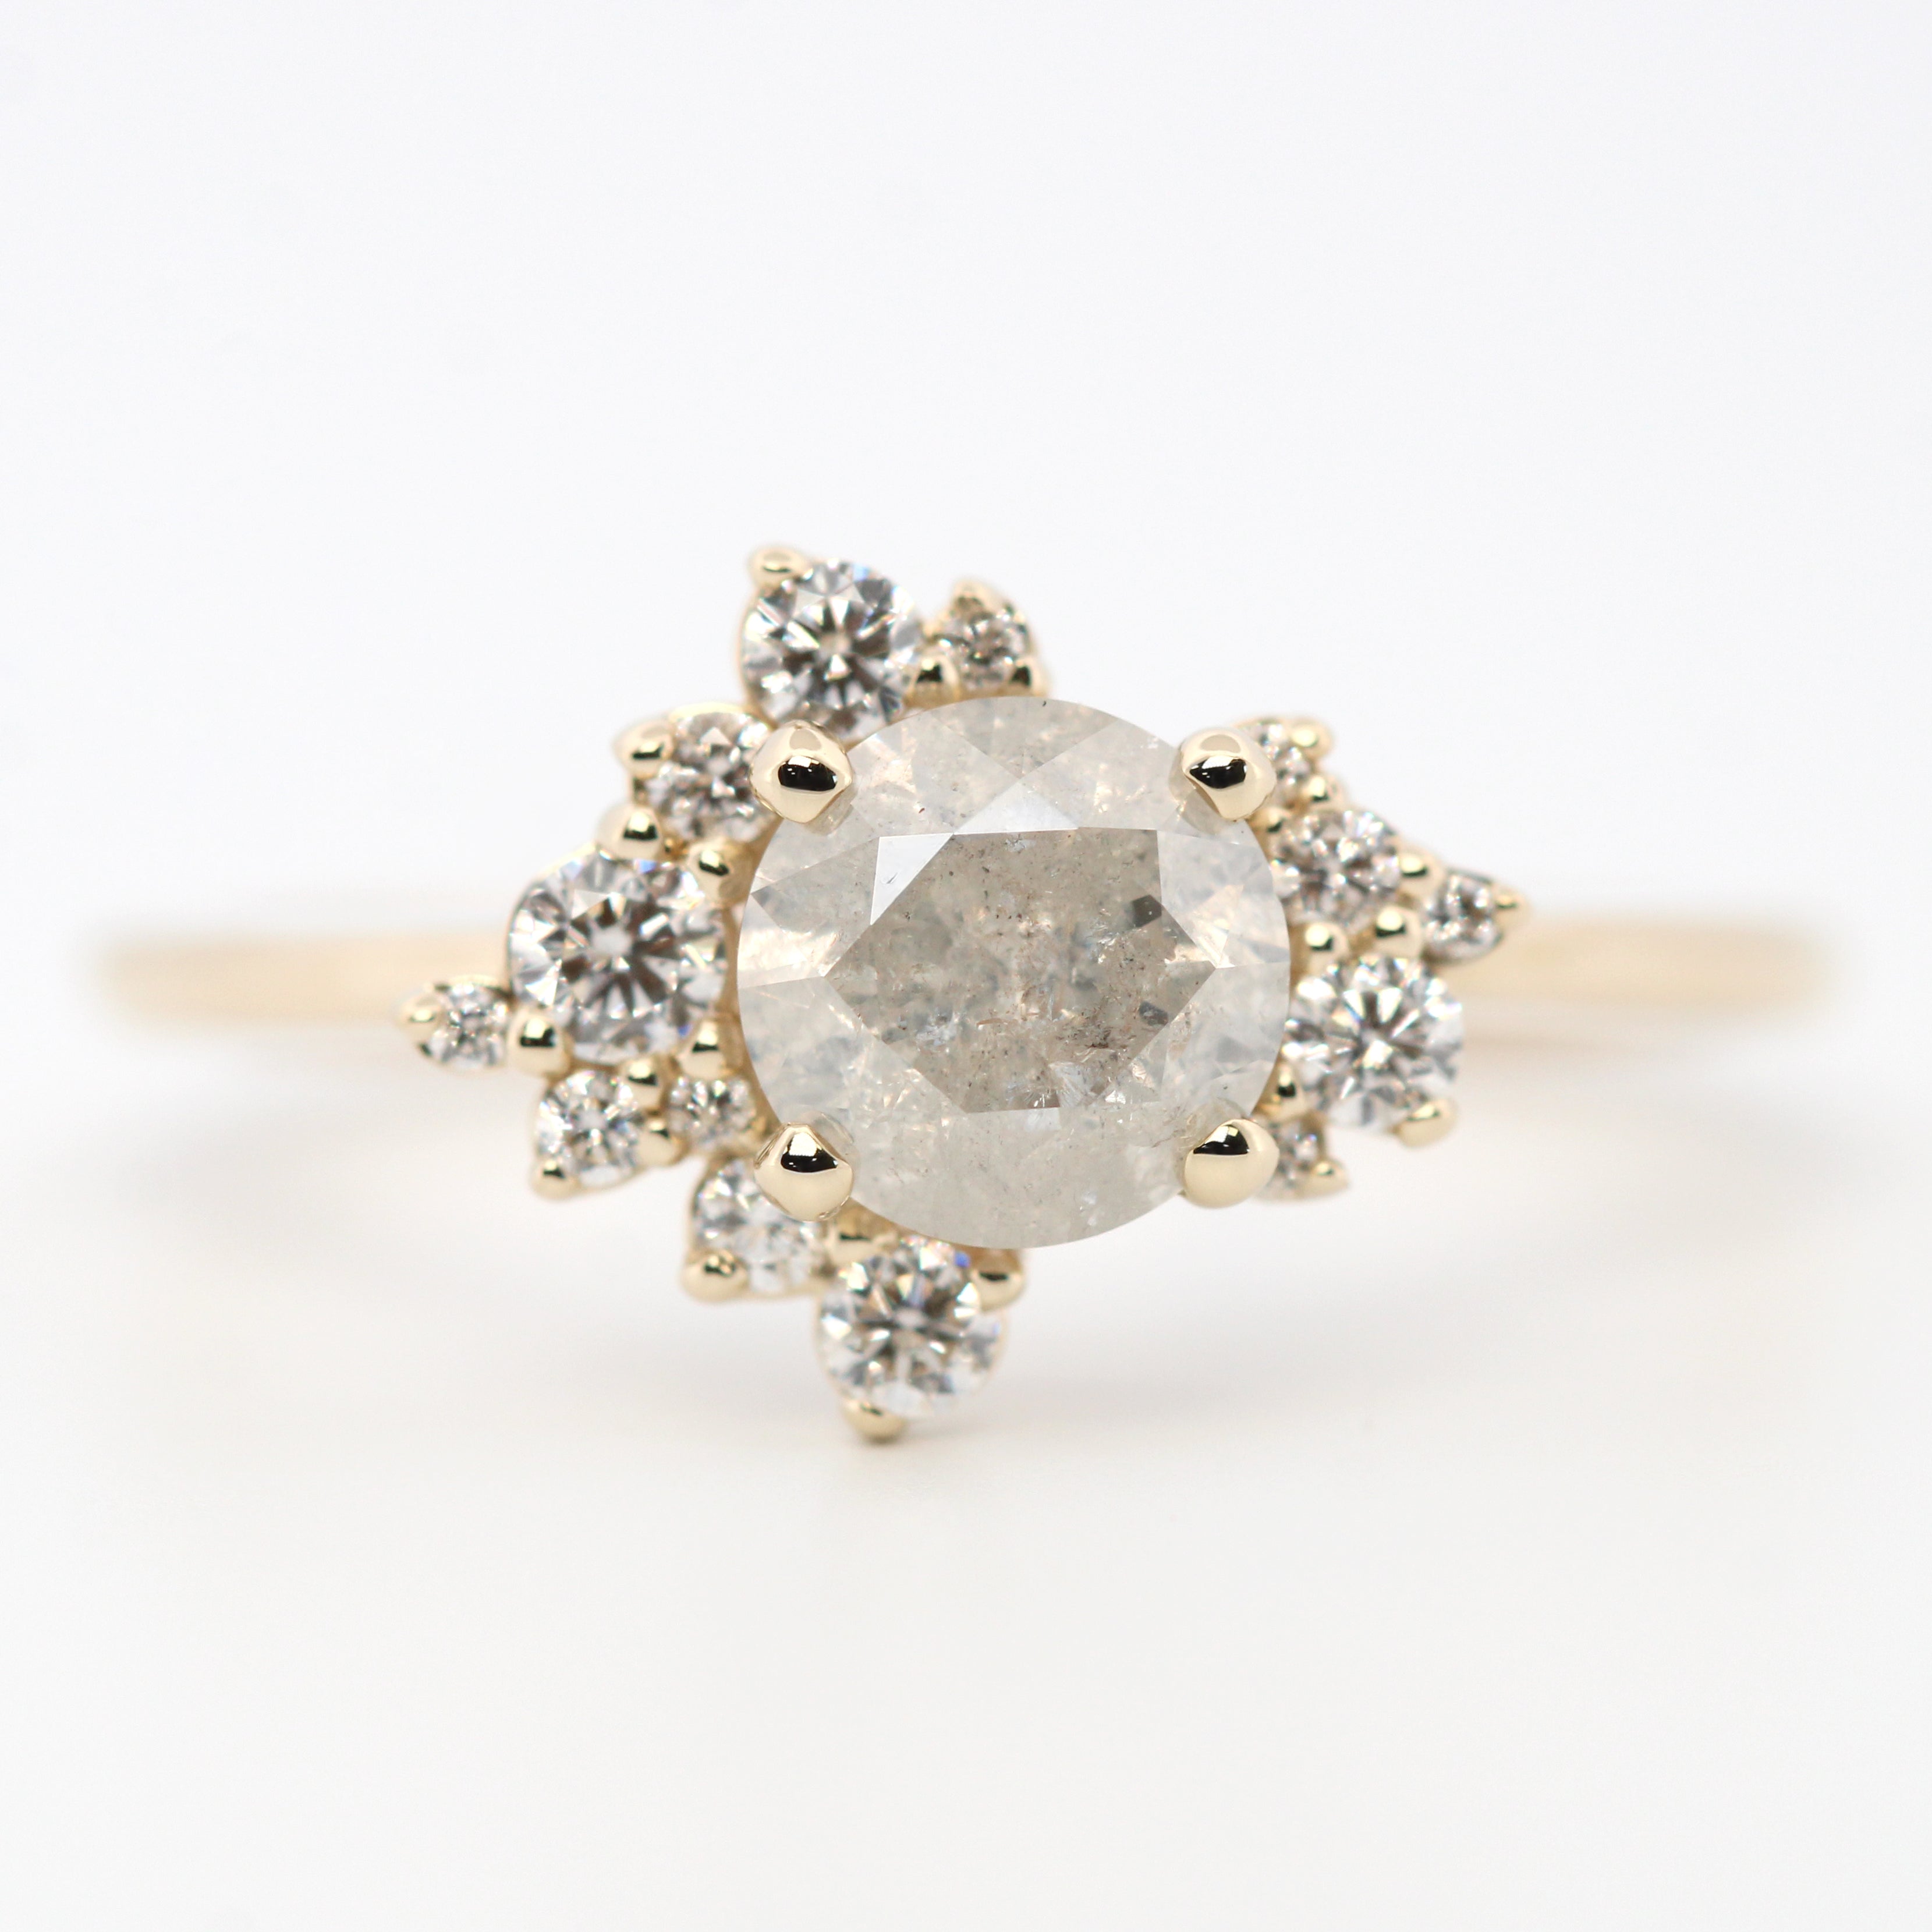 Toi et Moi Ring with a 0.58 Light Gray Round Celestial Diamond and